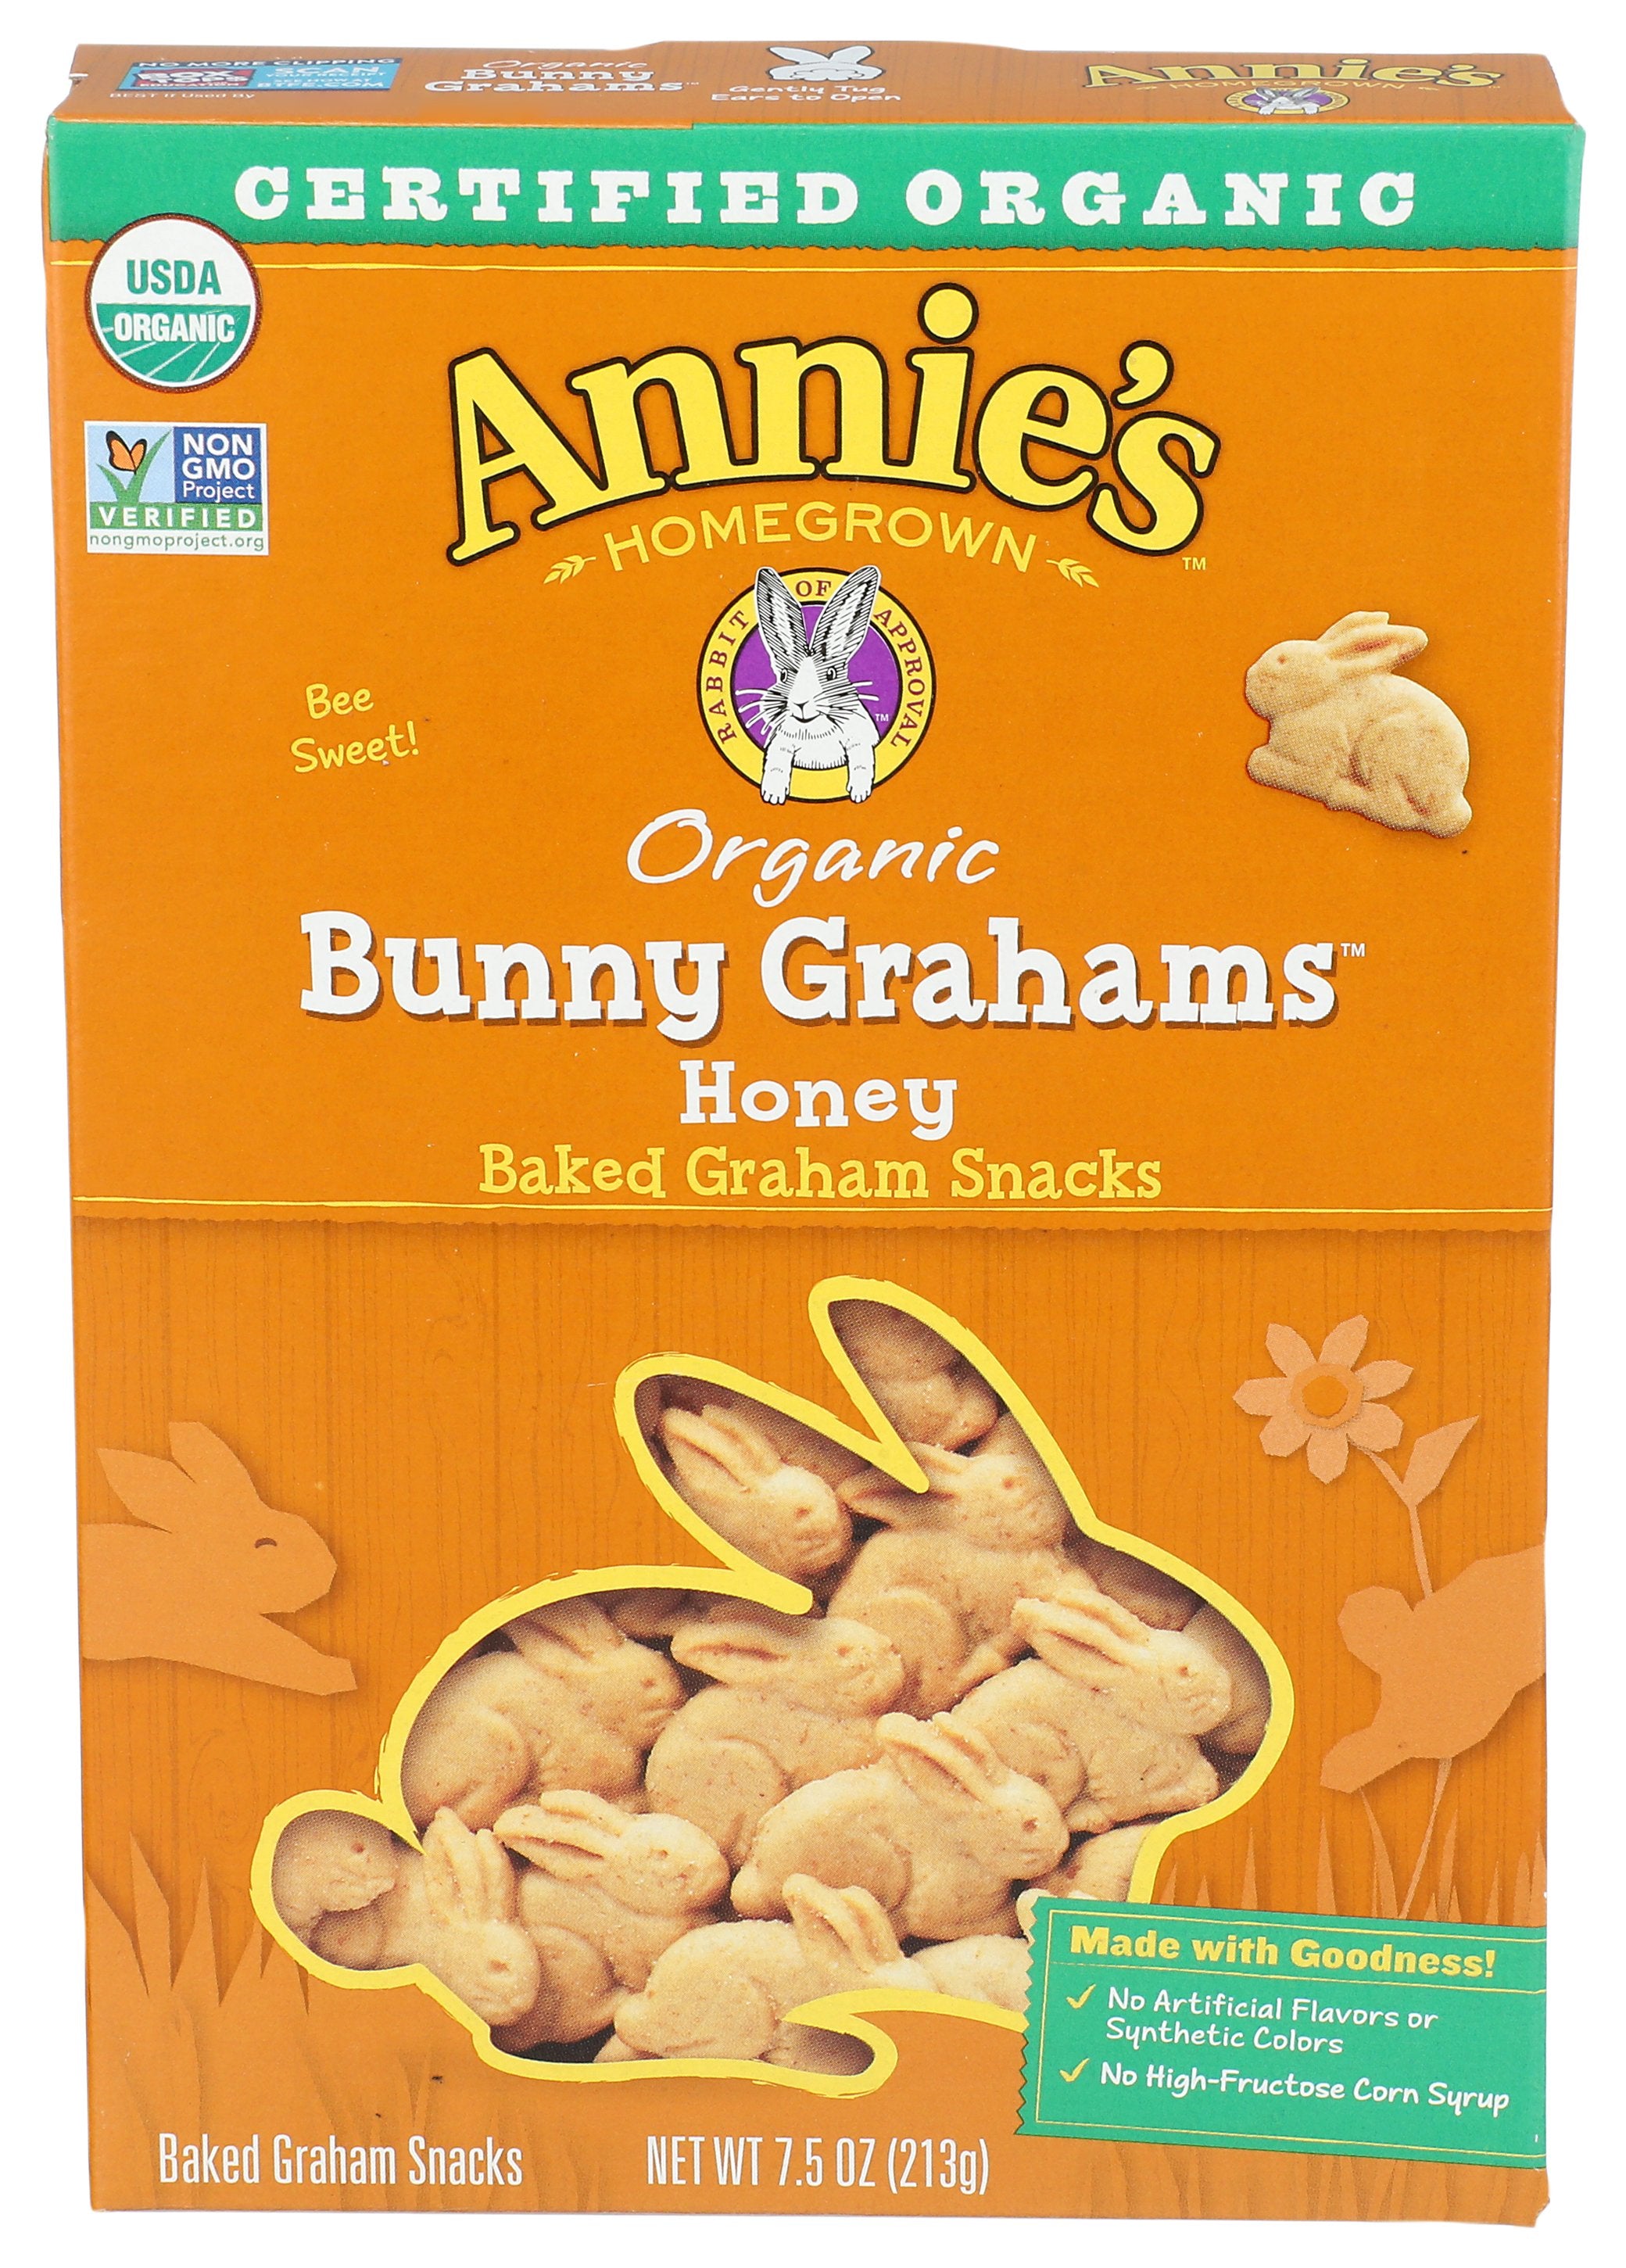 ANNIES HOMEGROWN COOKIE BUNNY GRAHAM HONEY - Case of 3